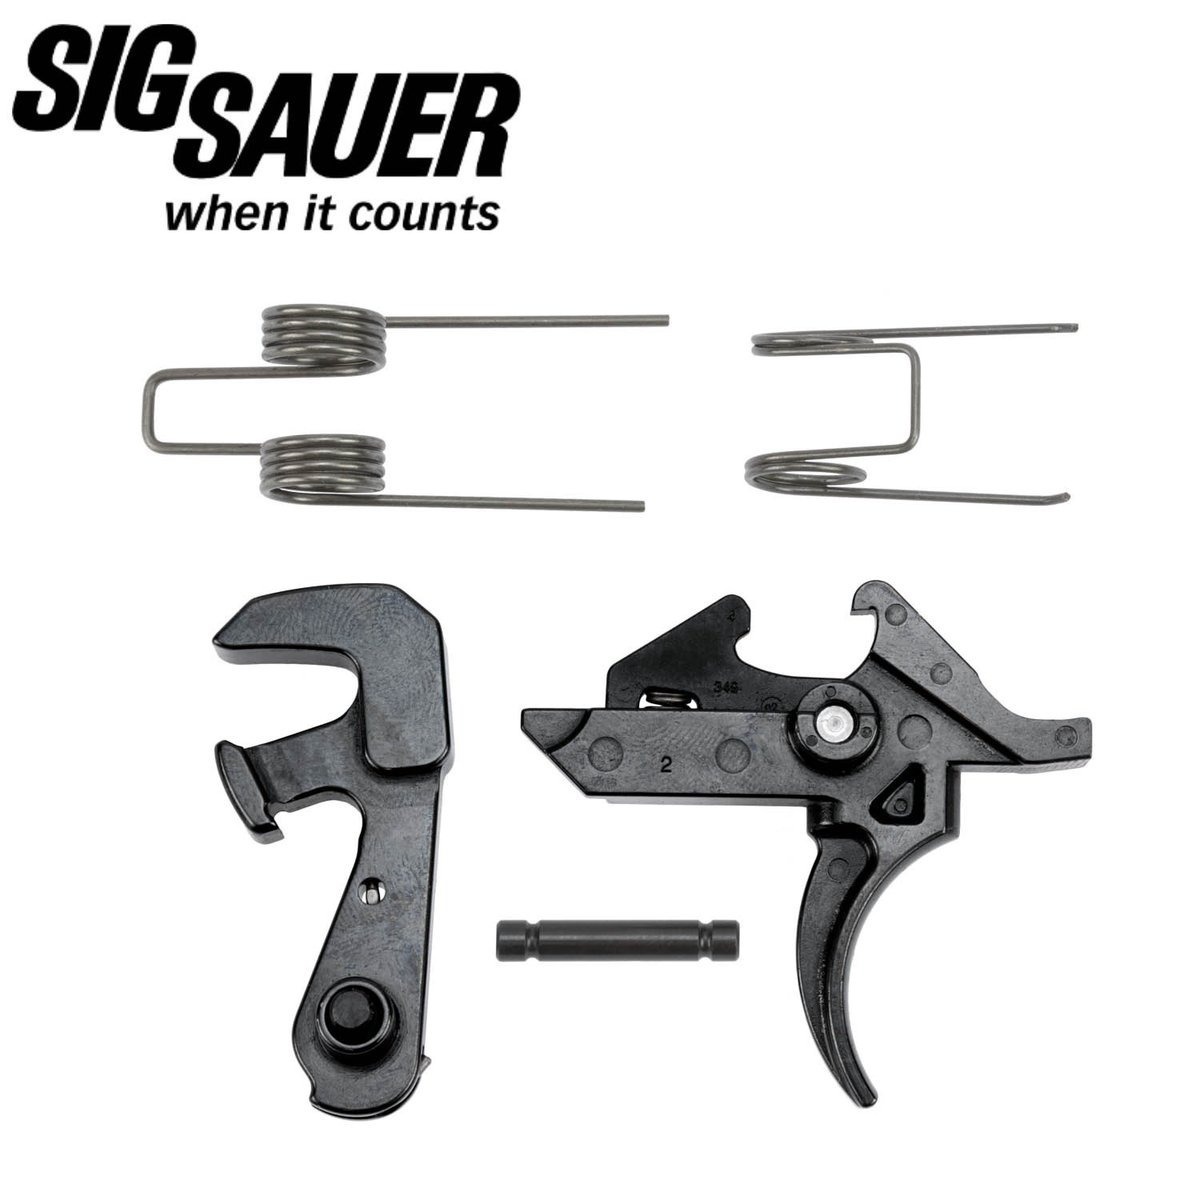 Sig Sauer Duo drop in two stage match AR15/AR10 trigger for $69/ea currently here: mrgunsngear.org/3uDExVr 

Cheapest I've seen it 🦅

#AR15 #AR10 #SigSauer #DMR #SPR